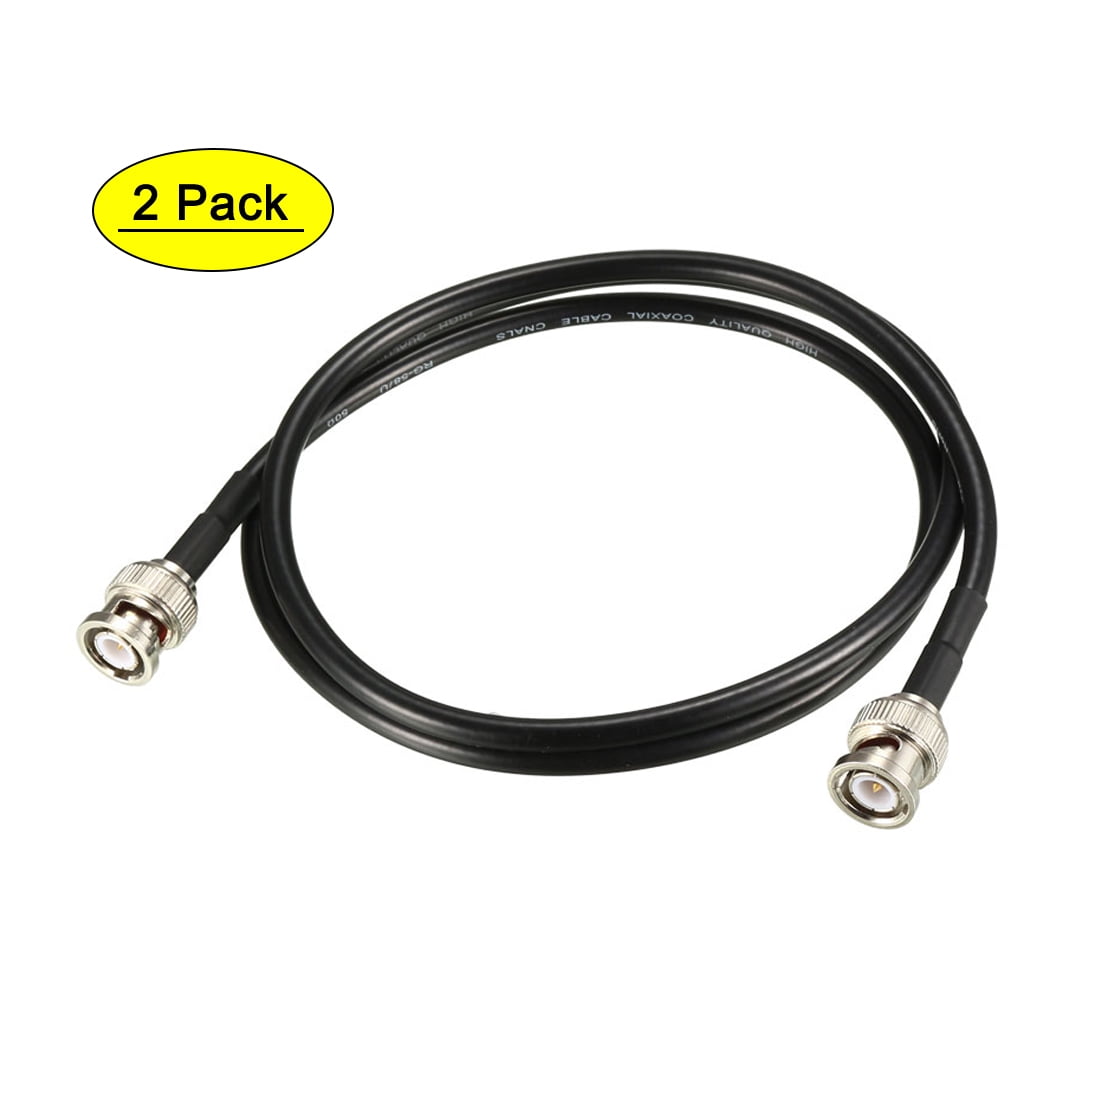 USA-CA RG174 AM/FM MALE to BNC MALE ANGLE Coaxial RF Pigtail Cable 